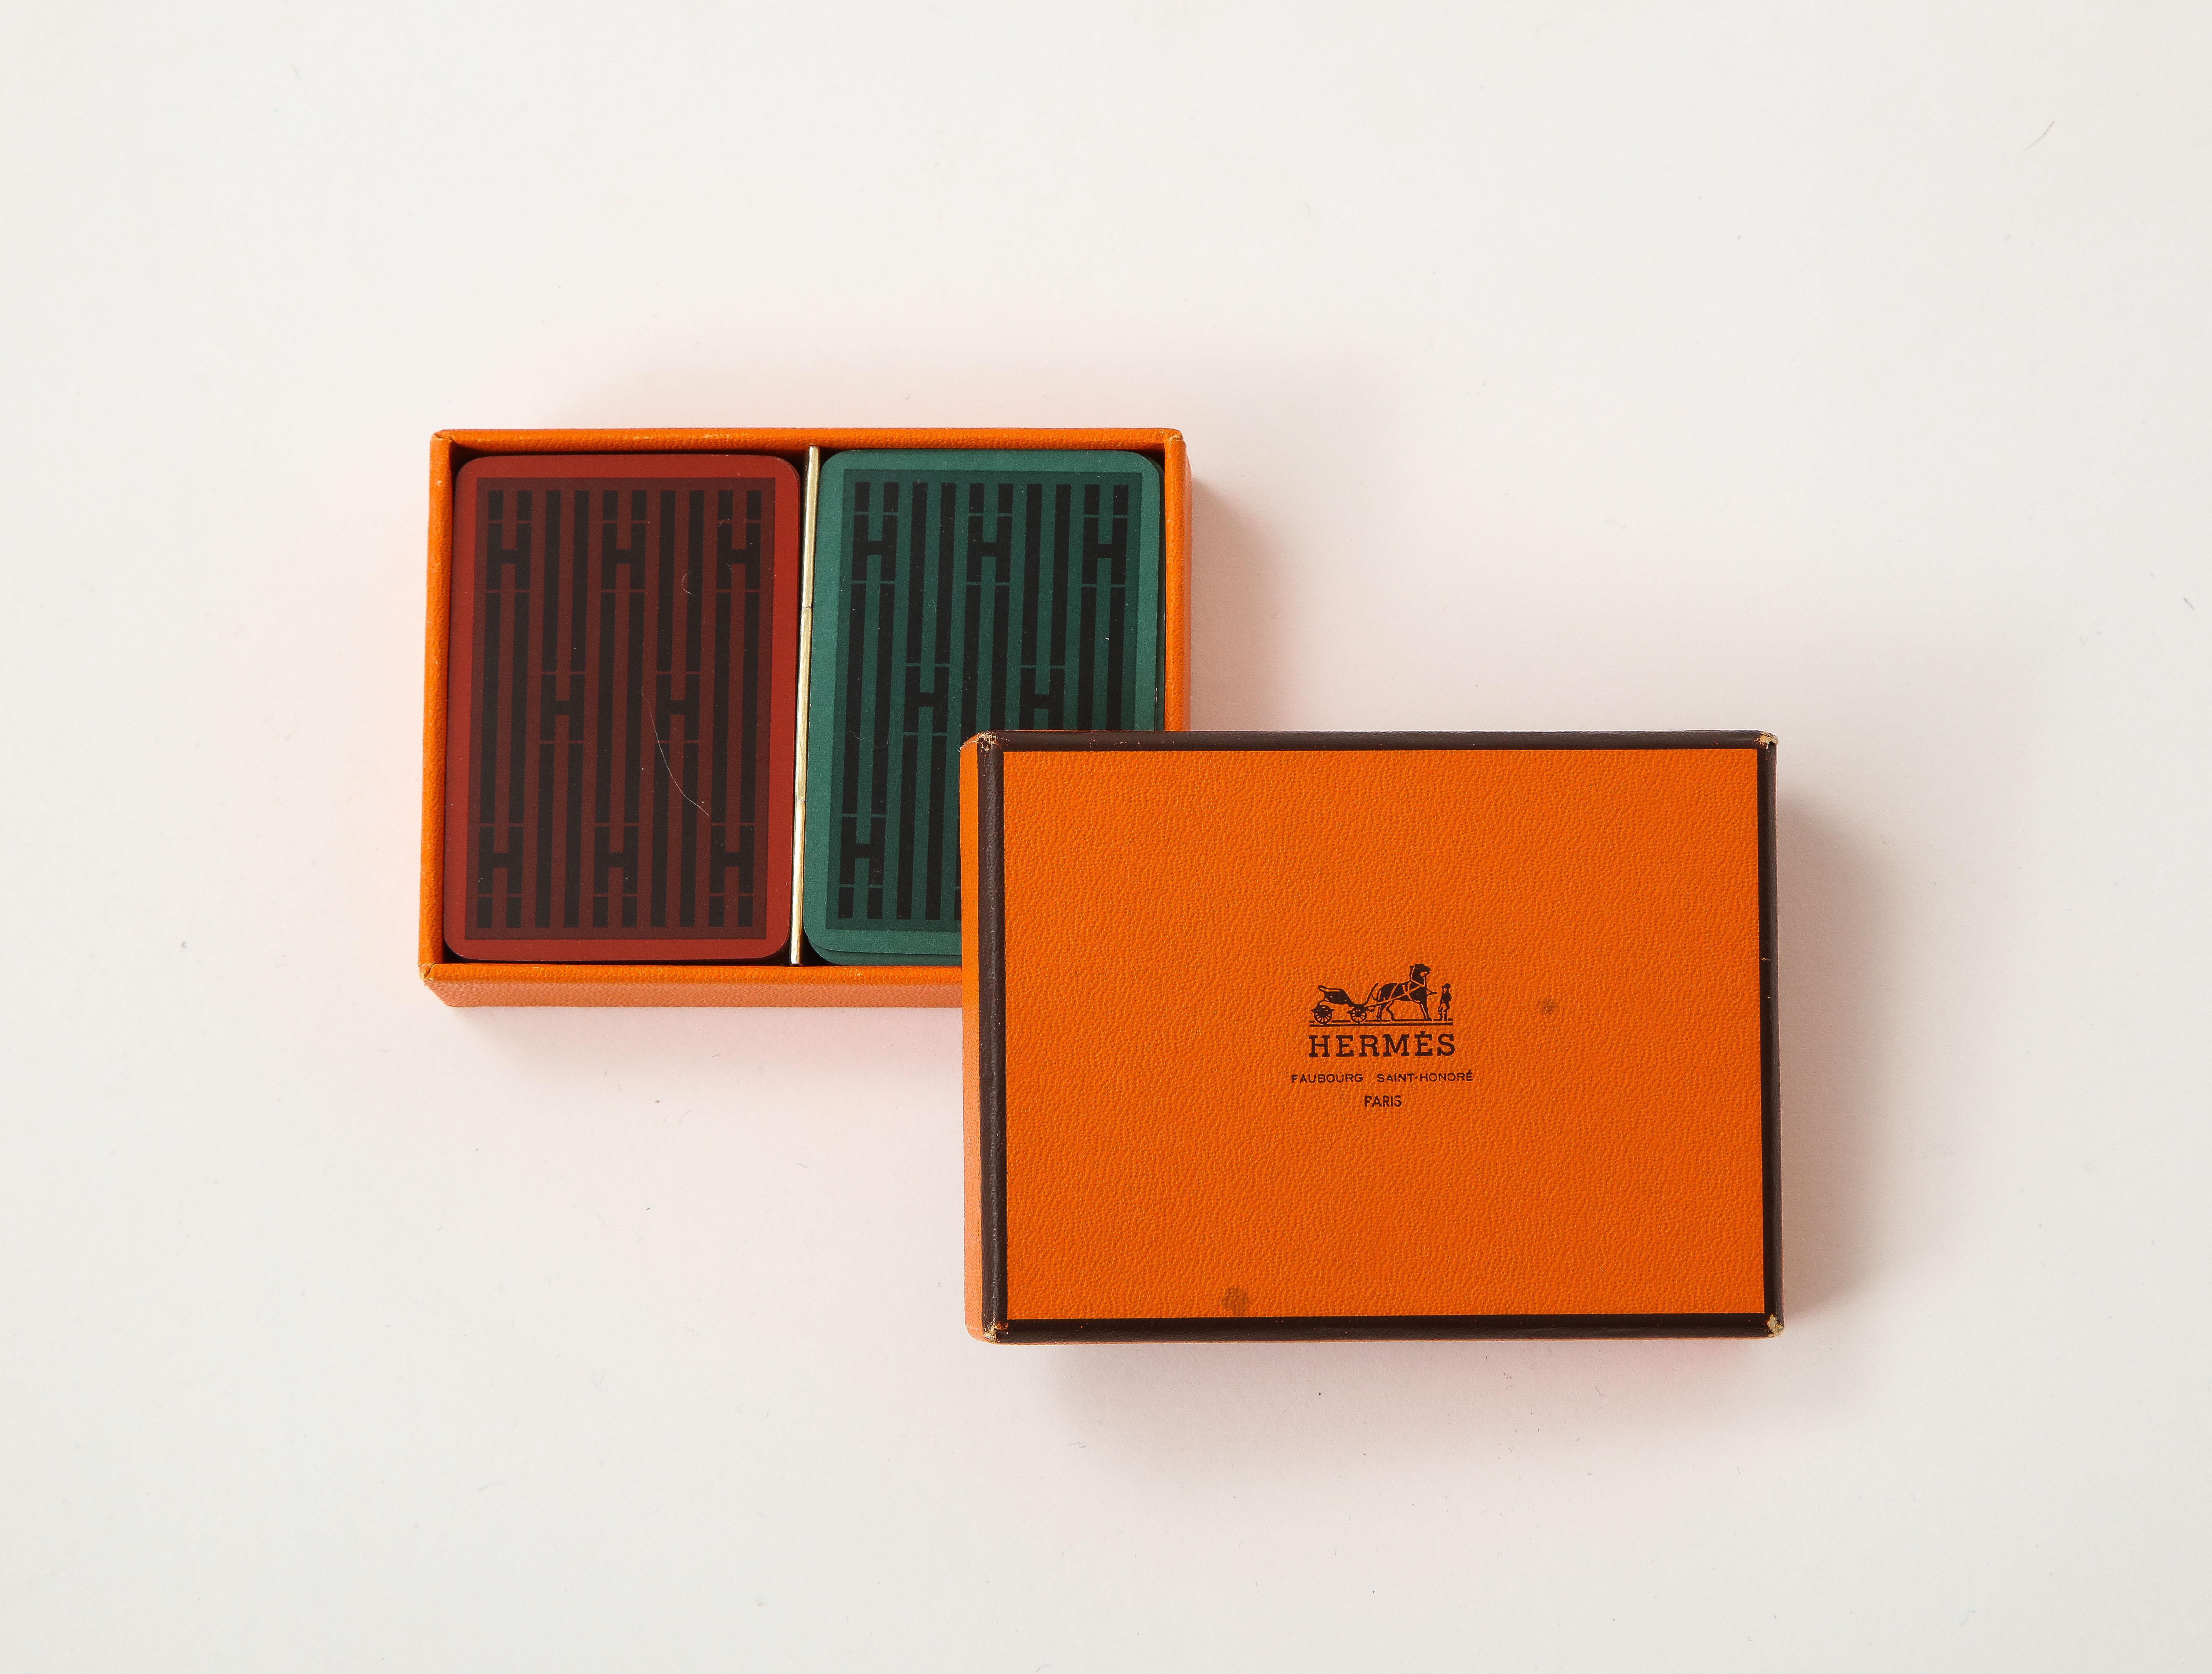 2 Decks of travel sized playing cards both featuring an abstracted graphic H pattern. Hermes, Paris.